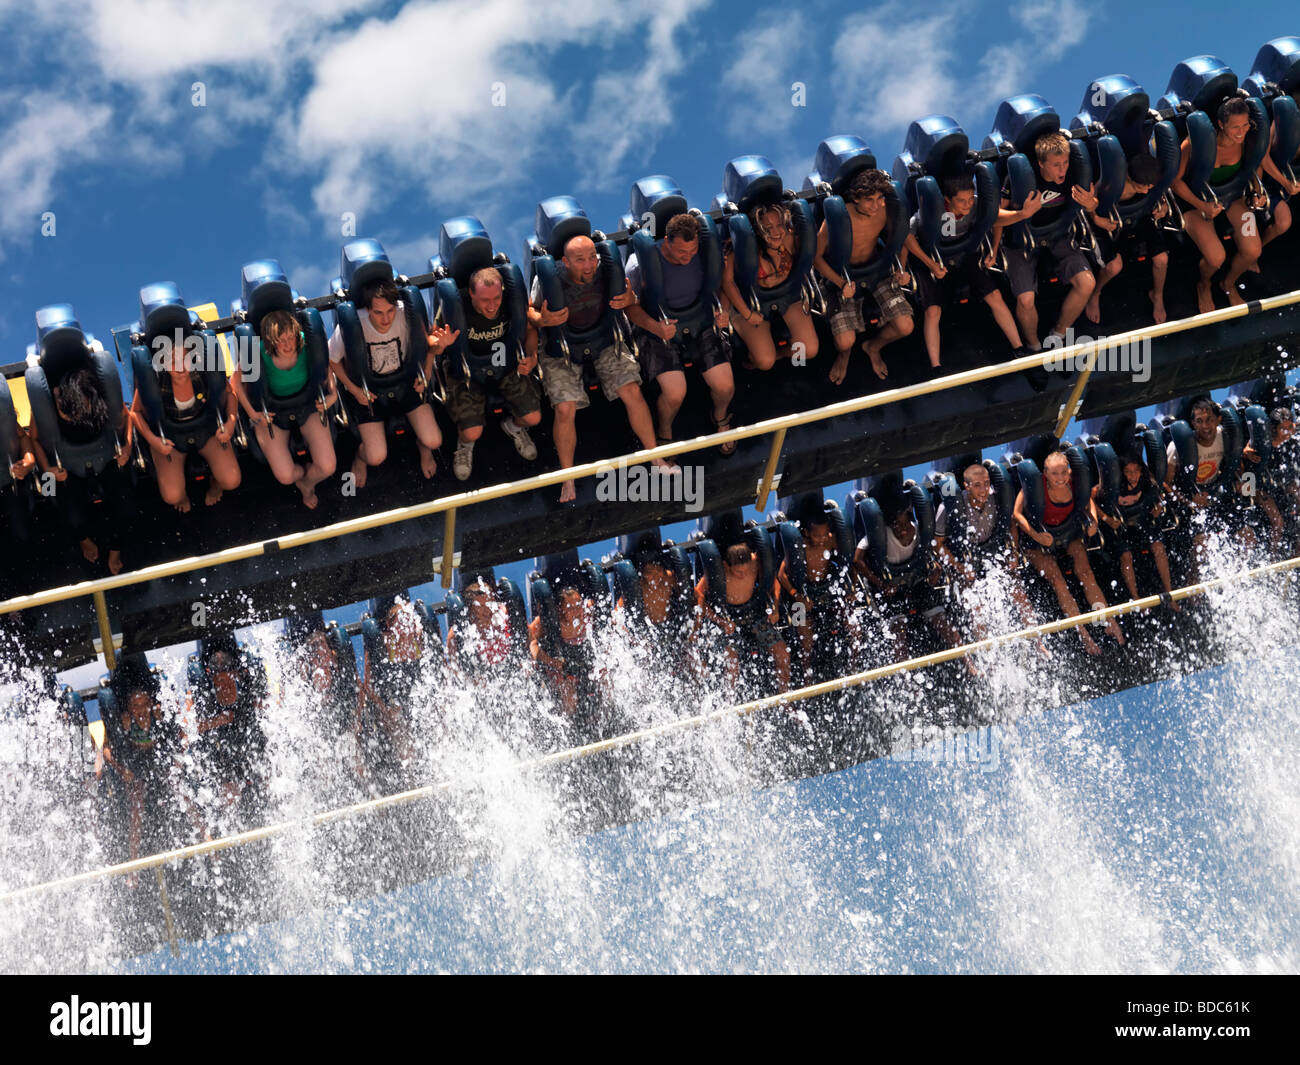 People on Riptide thrill ride descending towards the fountains of water Stock Photo